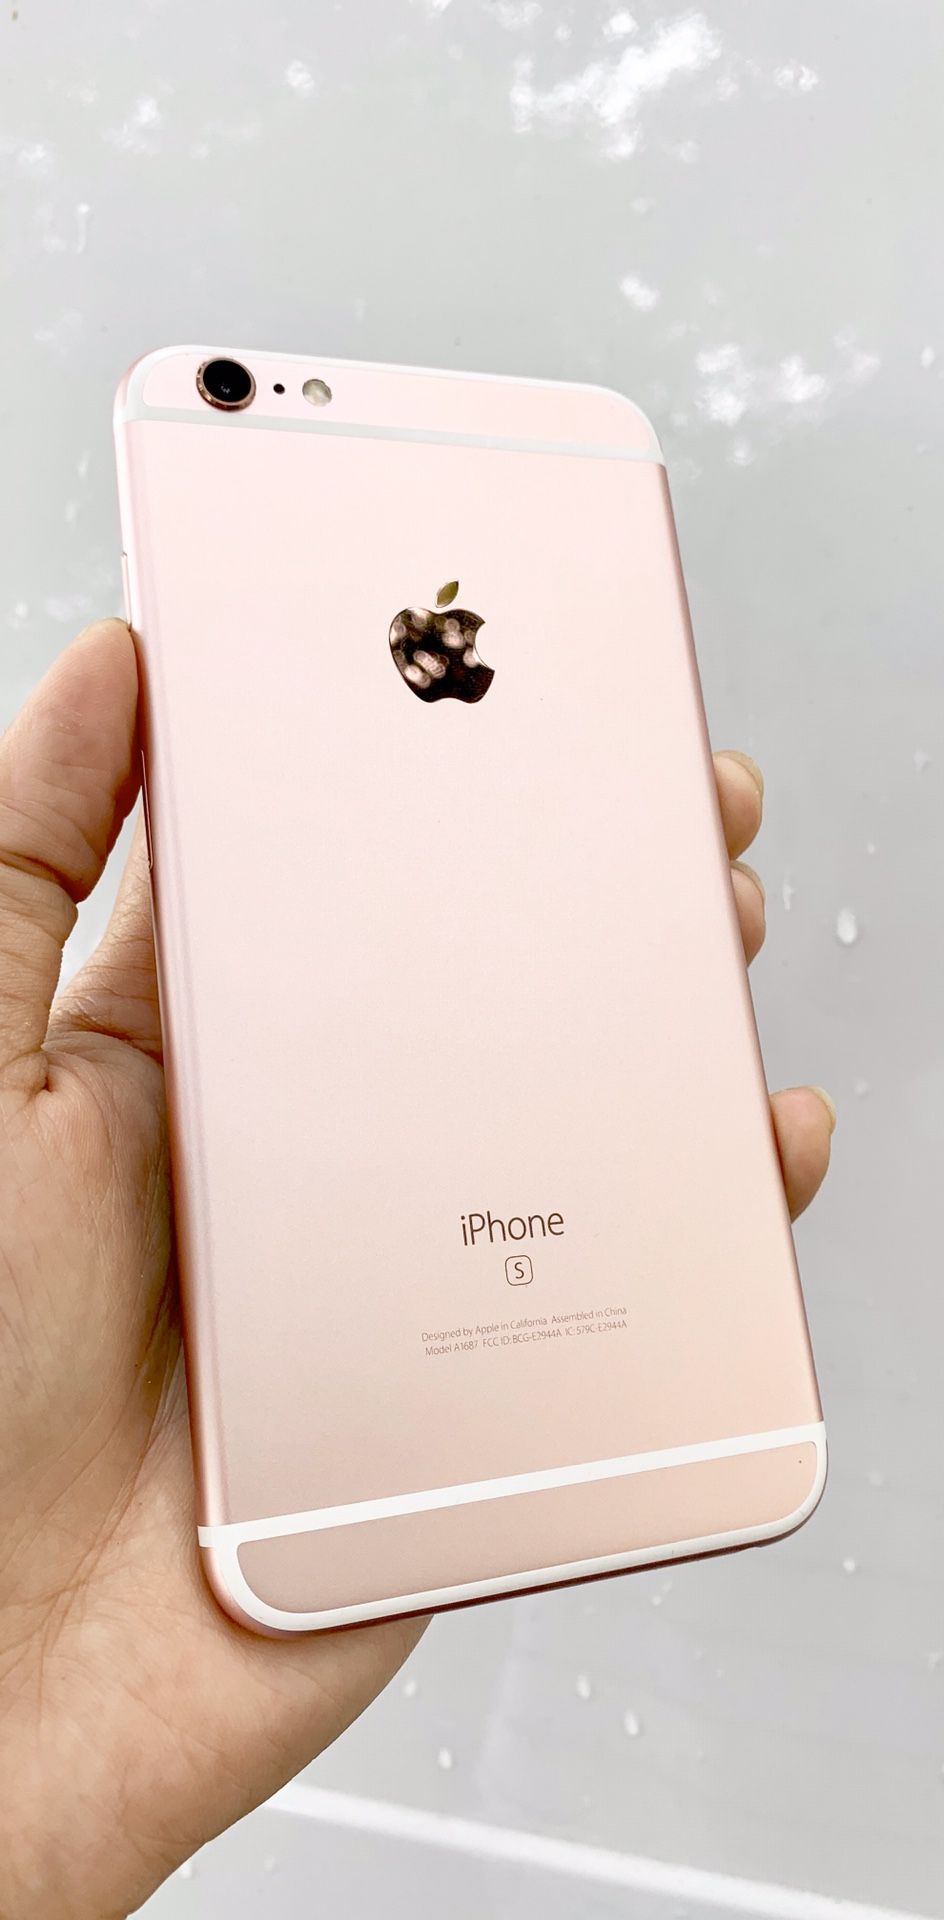 iPHONE 6S PLUS UNLOCKED - LIKE NEW - REAL PÍC